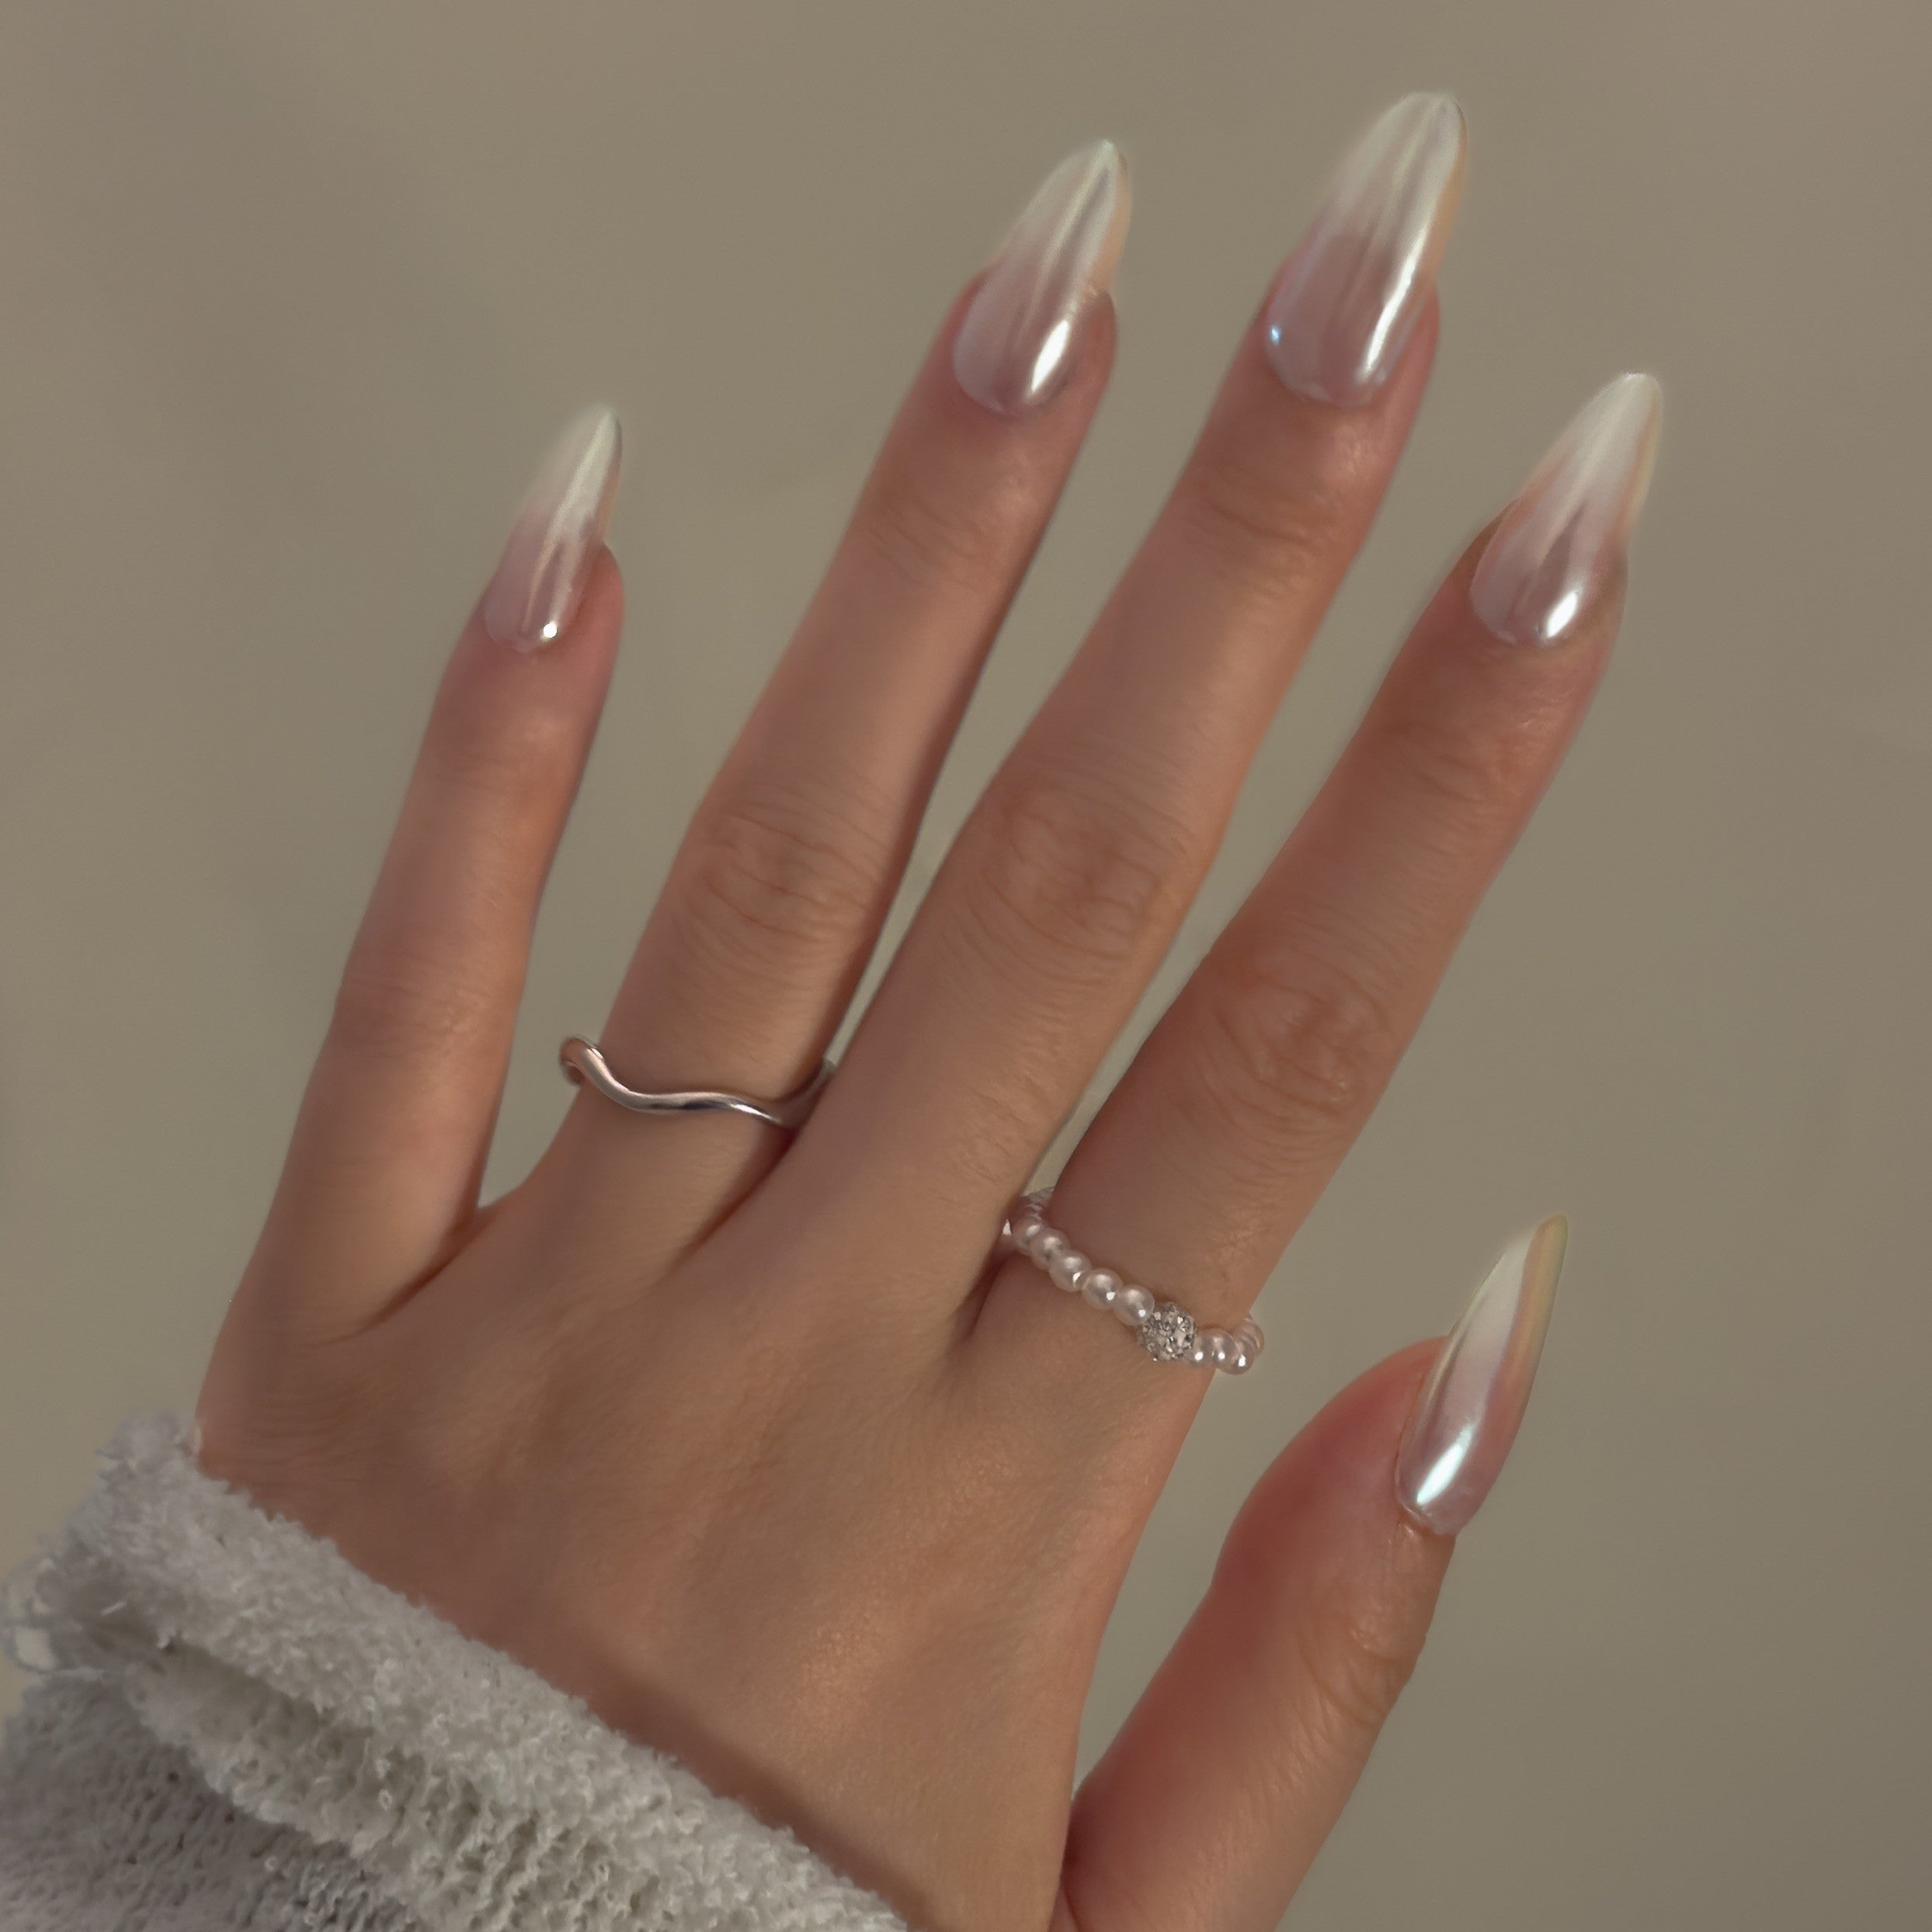 Close-up of a hand wearing MyLilith's Hailey Bieber’s glazed donut style press-on nails, featuring a shiny, pearl-like finish and almond-shaped tips.